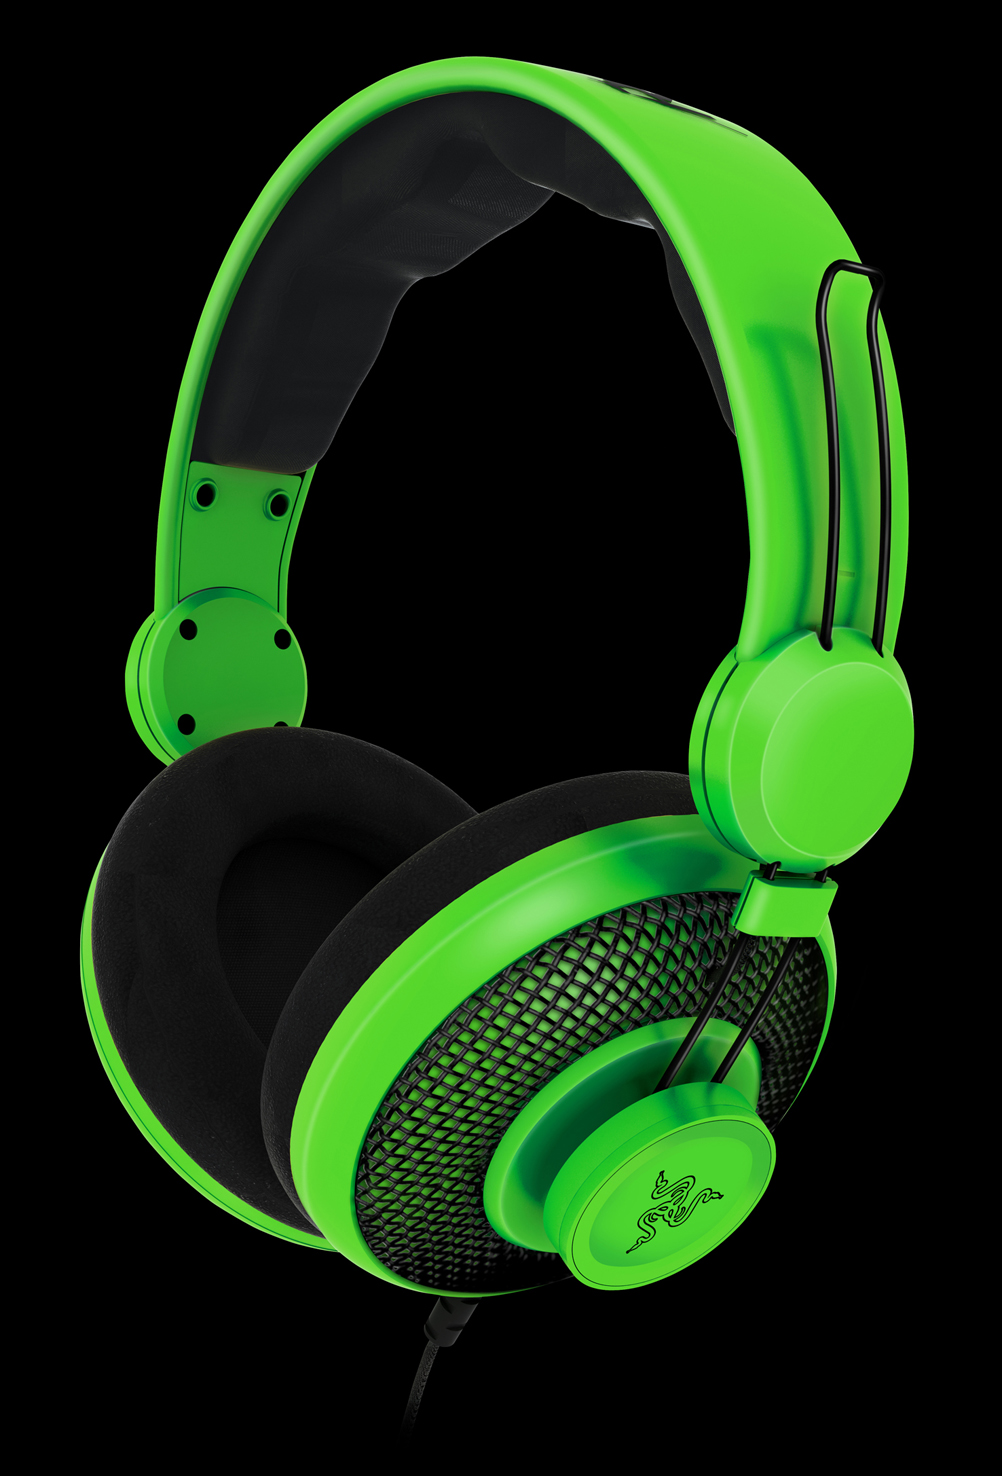 Razer Orca Headphones for both gamers and music maniacs